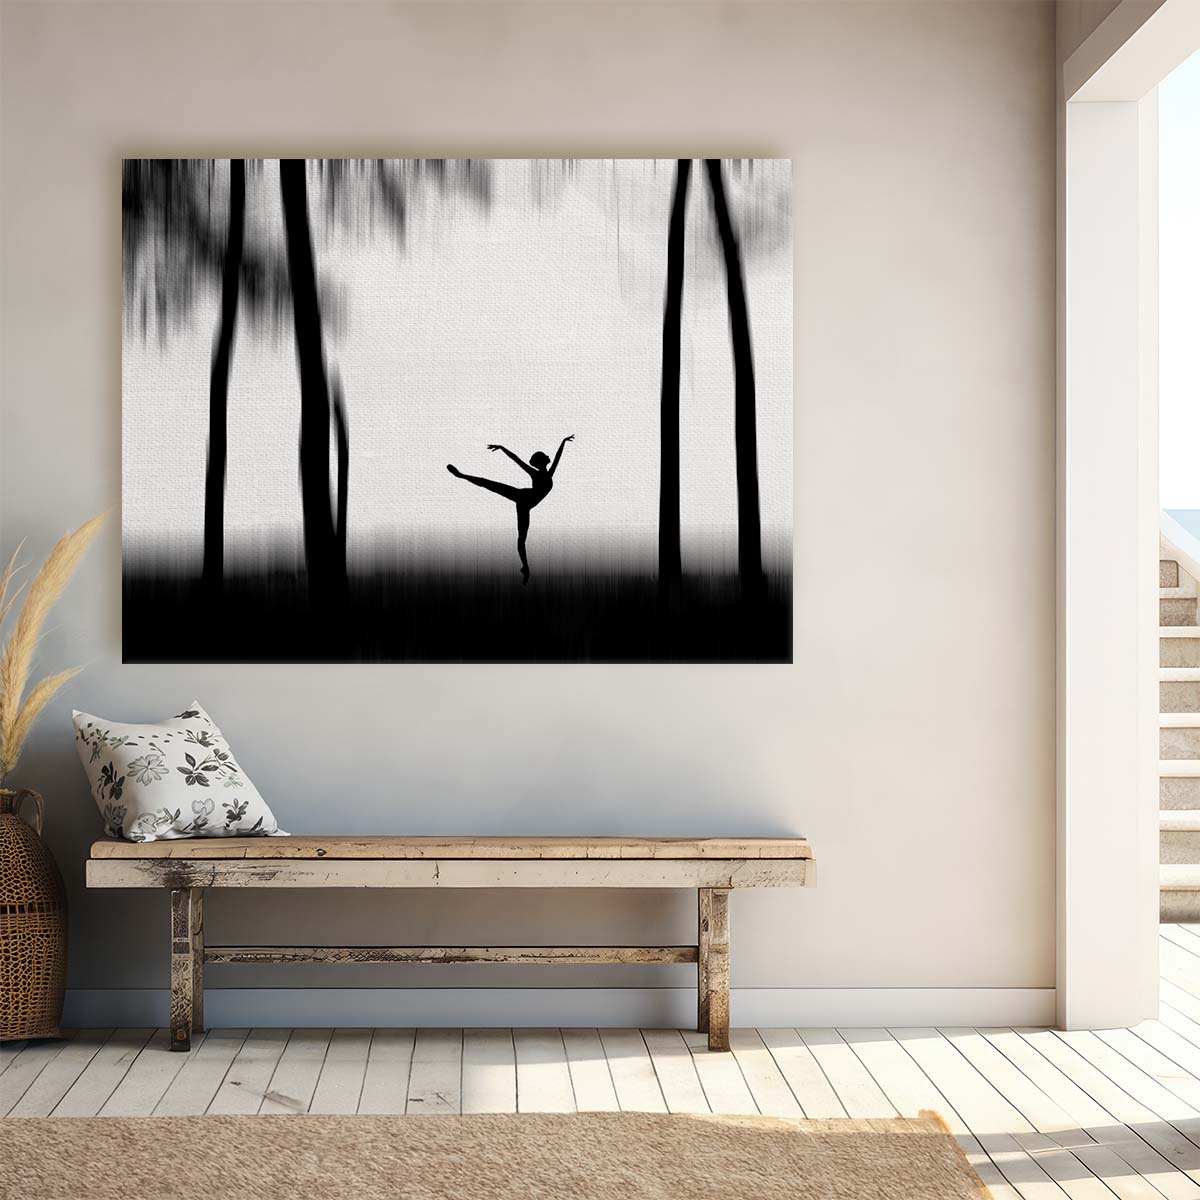 Elegant Ballerina Dance Silhouette BW Wall Art by Luxuriance Designs. Made in USA.